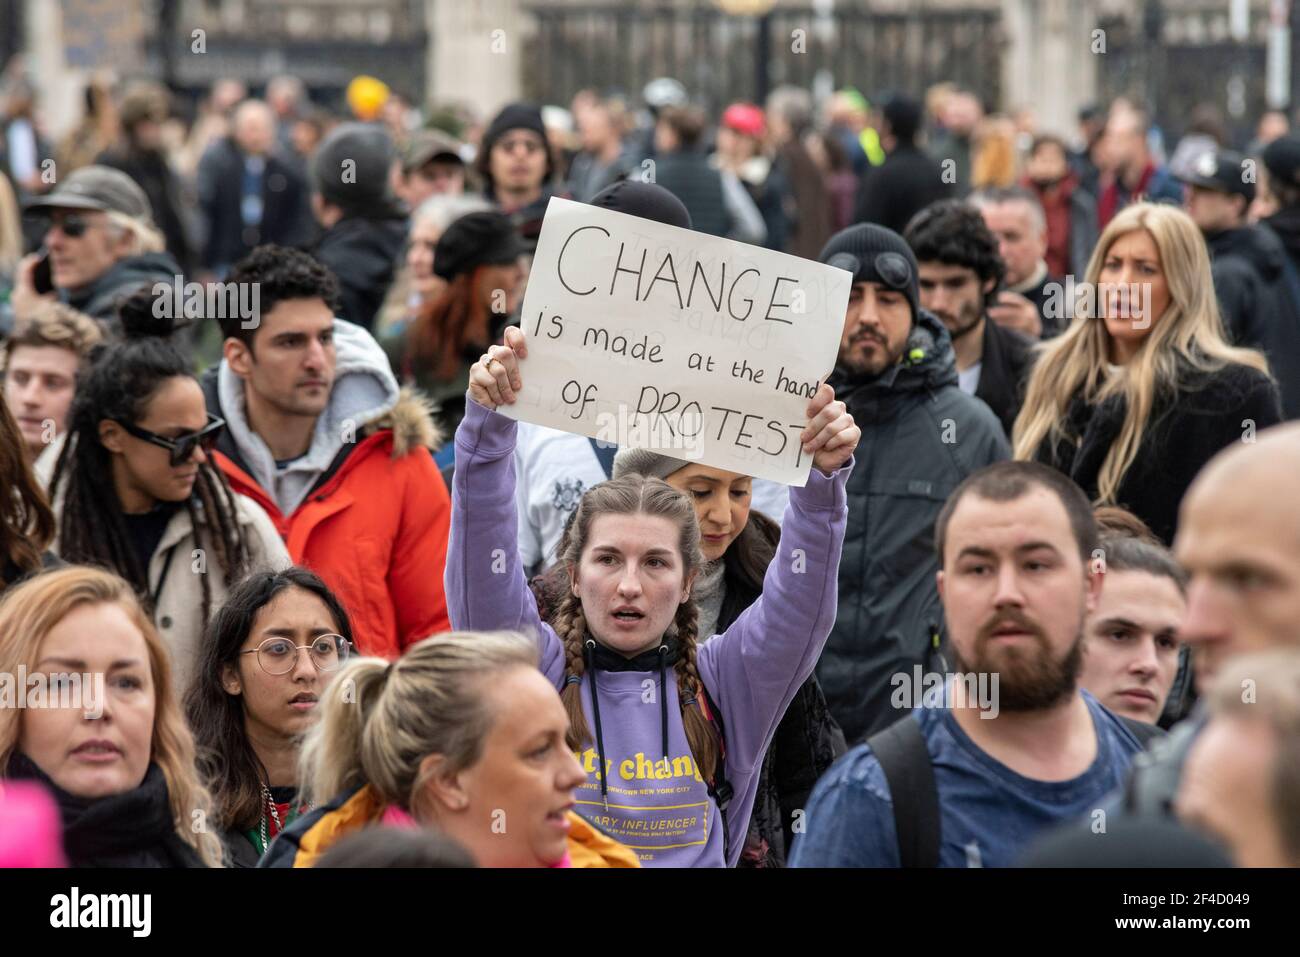 Westminster, London, UK. 20th Mar, 2021. Anti-lockdown protesters have gathered in London. Large numbers of protesters have marched around Westminster, bringing traffic to a standstill in Whitehall and Parliament Square. Female with placard stating change is made at the hands of protest Stock Photo